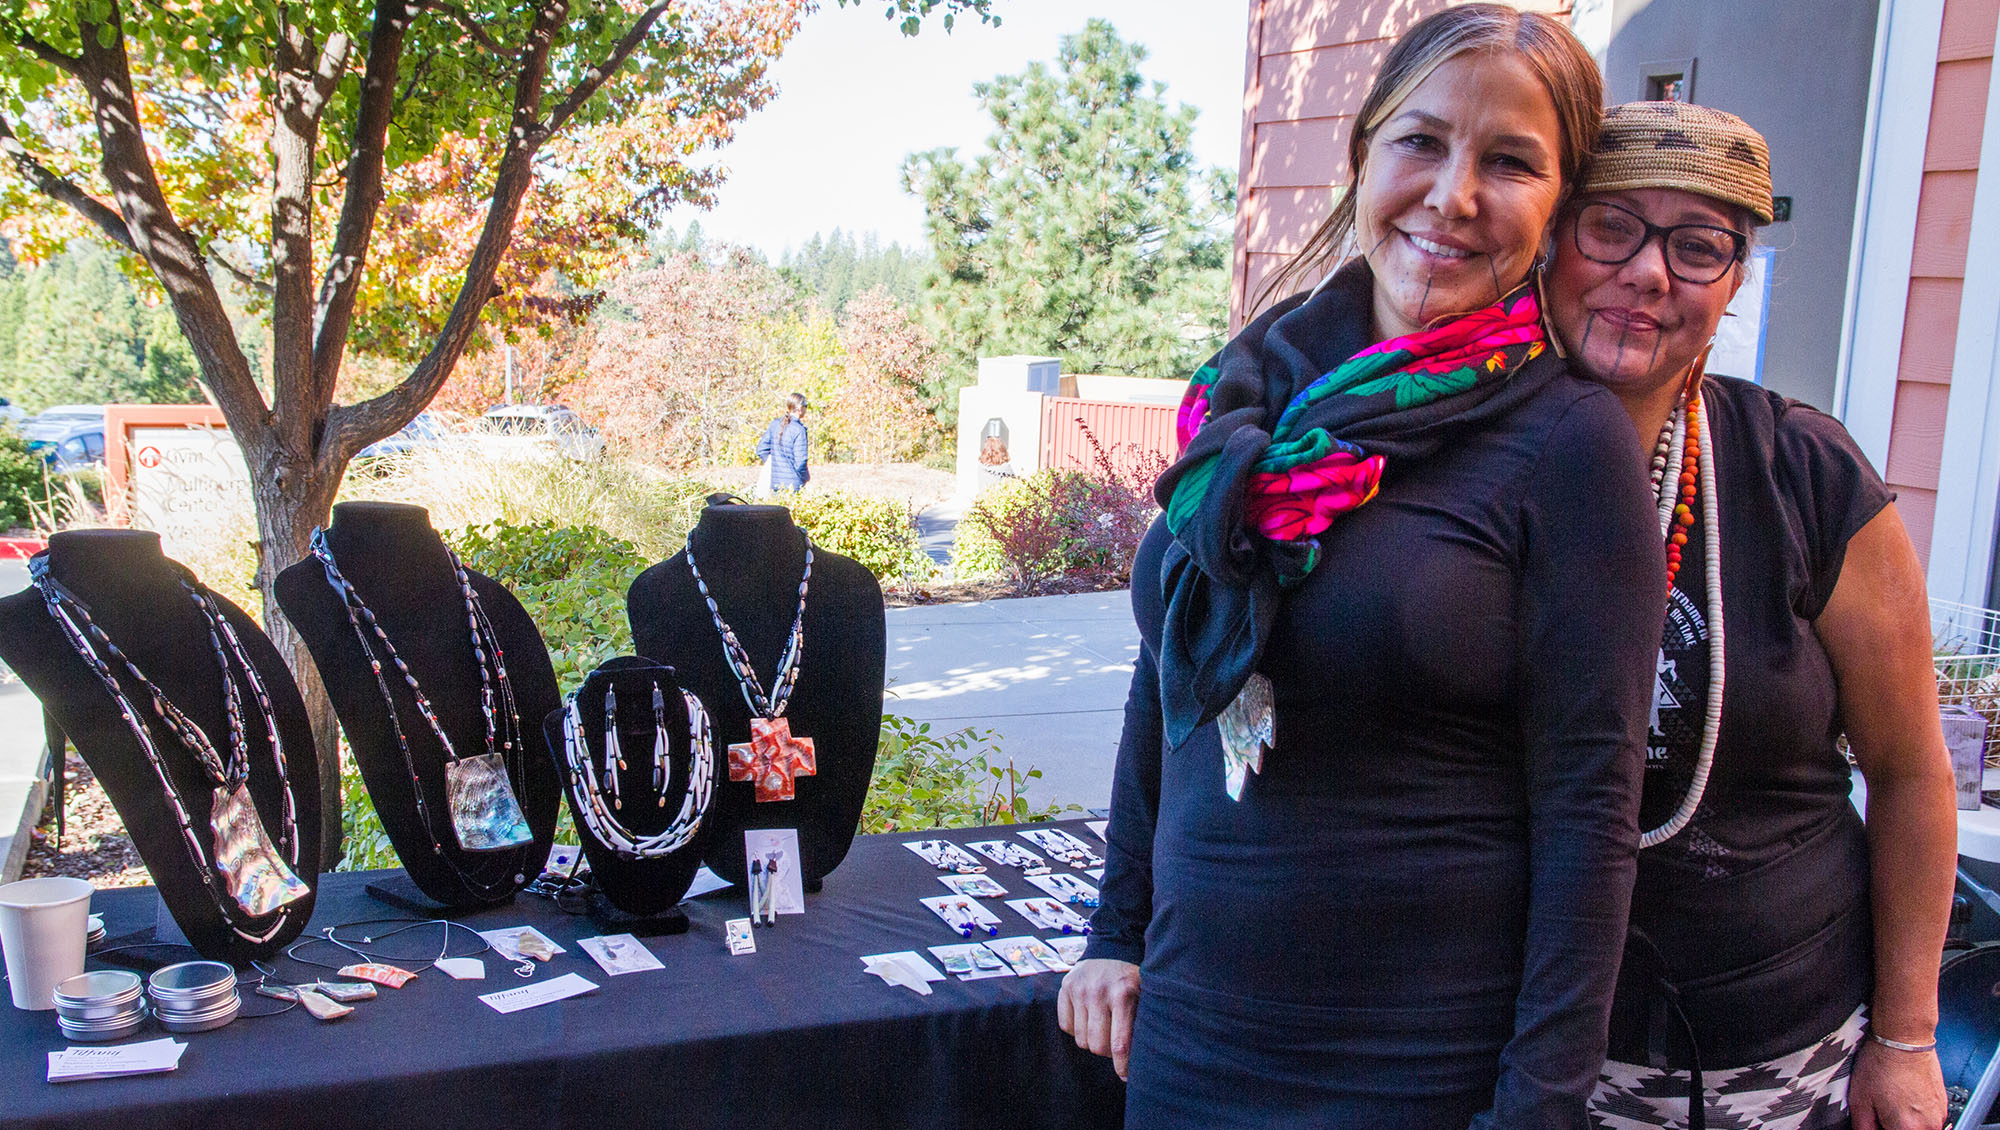 Two Nisenan Native American women selling traditional and contemporary jewelry including necklaces and earrings